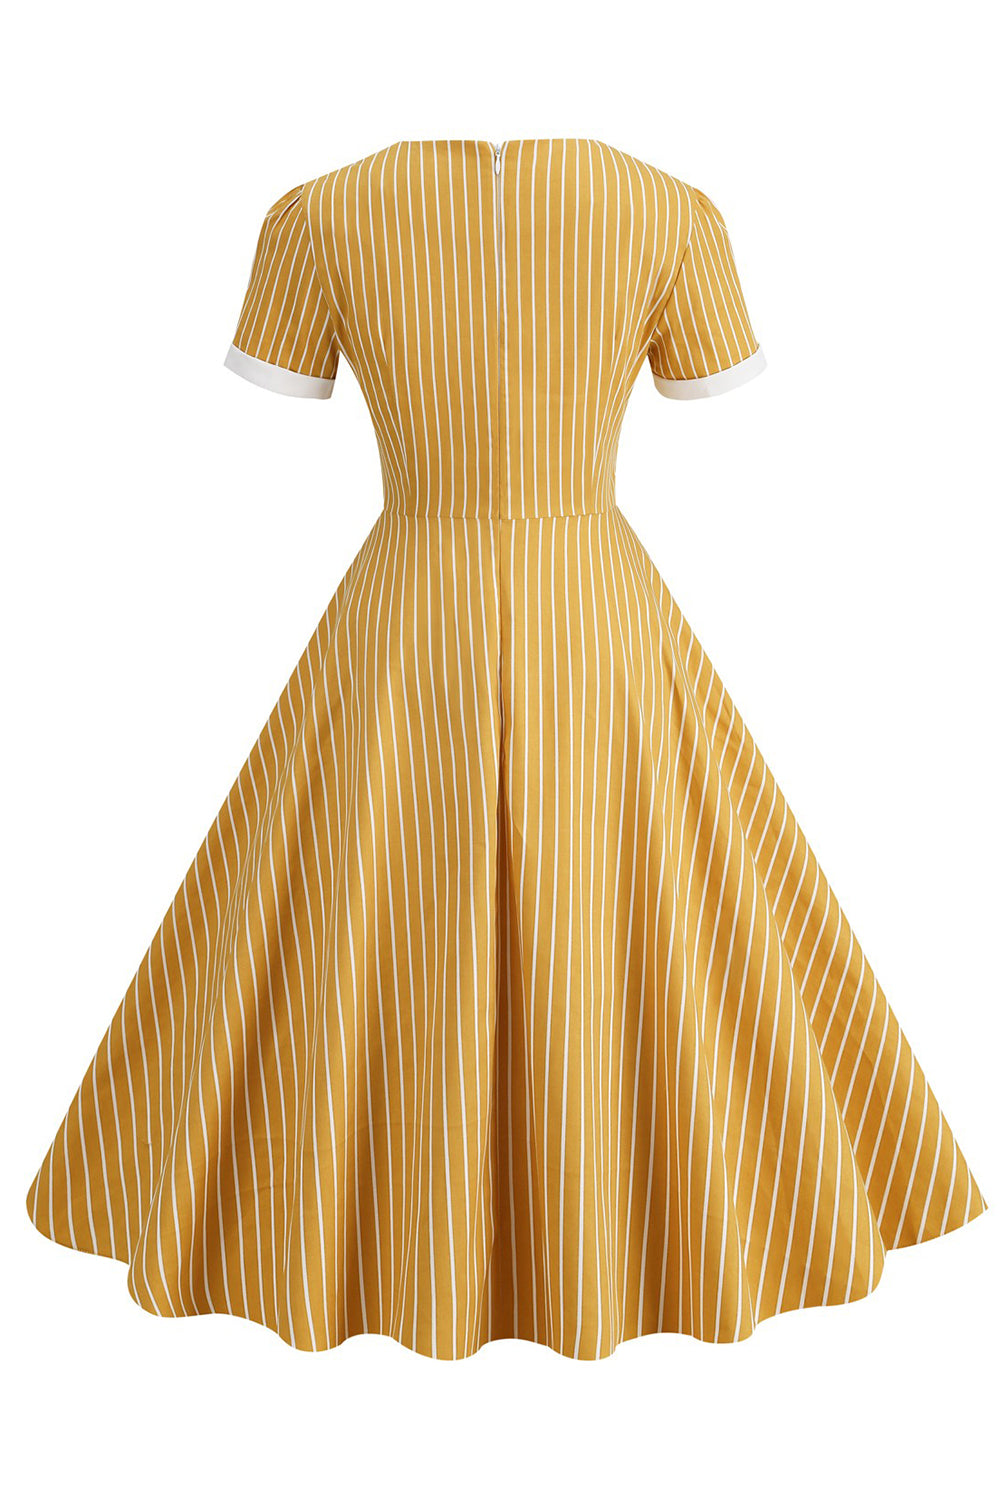 Blue Striped Vintage Dress with Short Sleeves